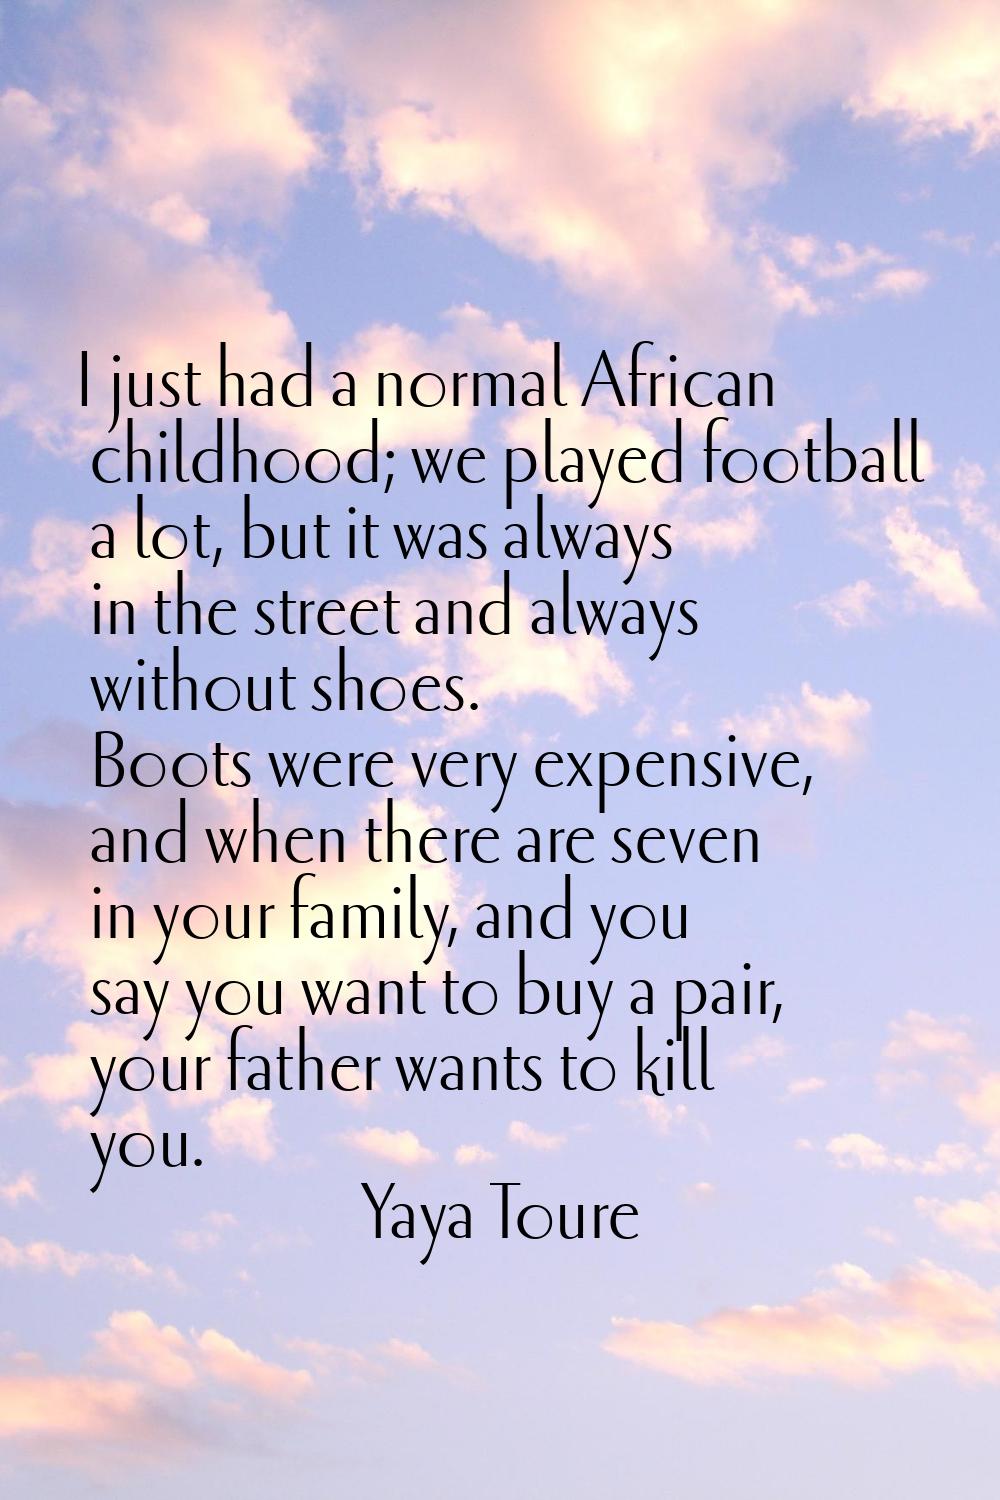 I just had a normal African childhood; we played football a lot, but it was always in the street an